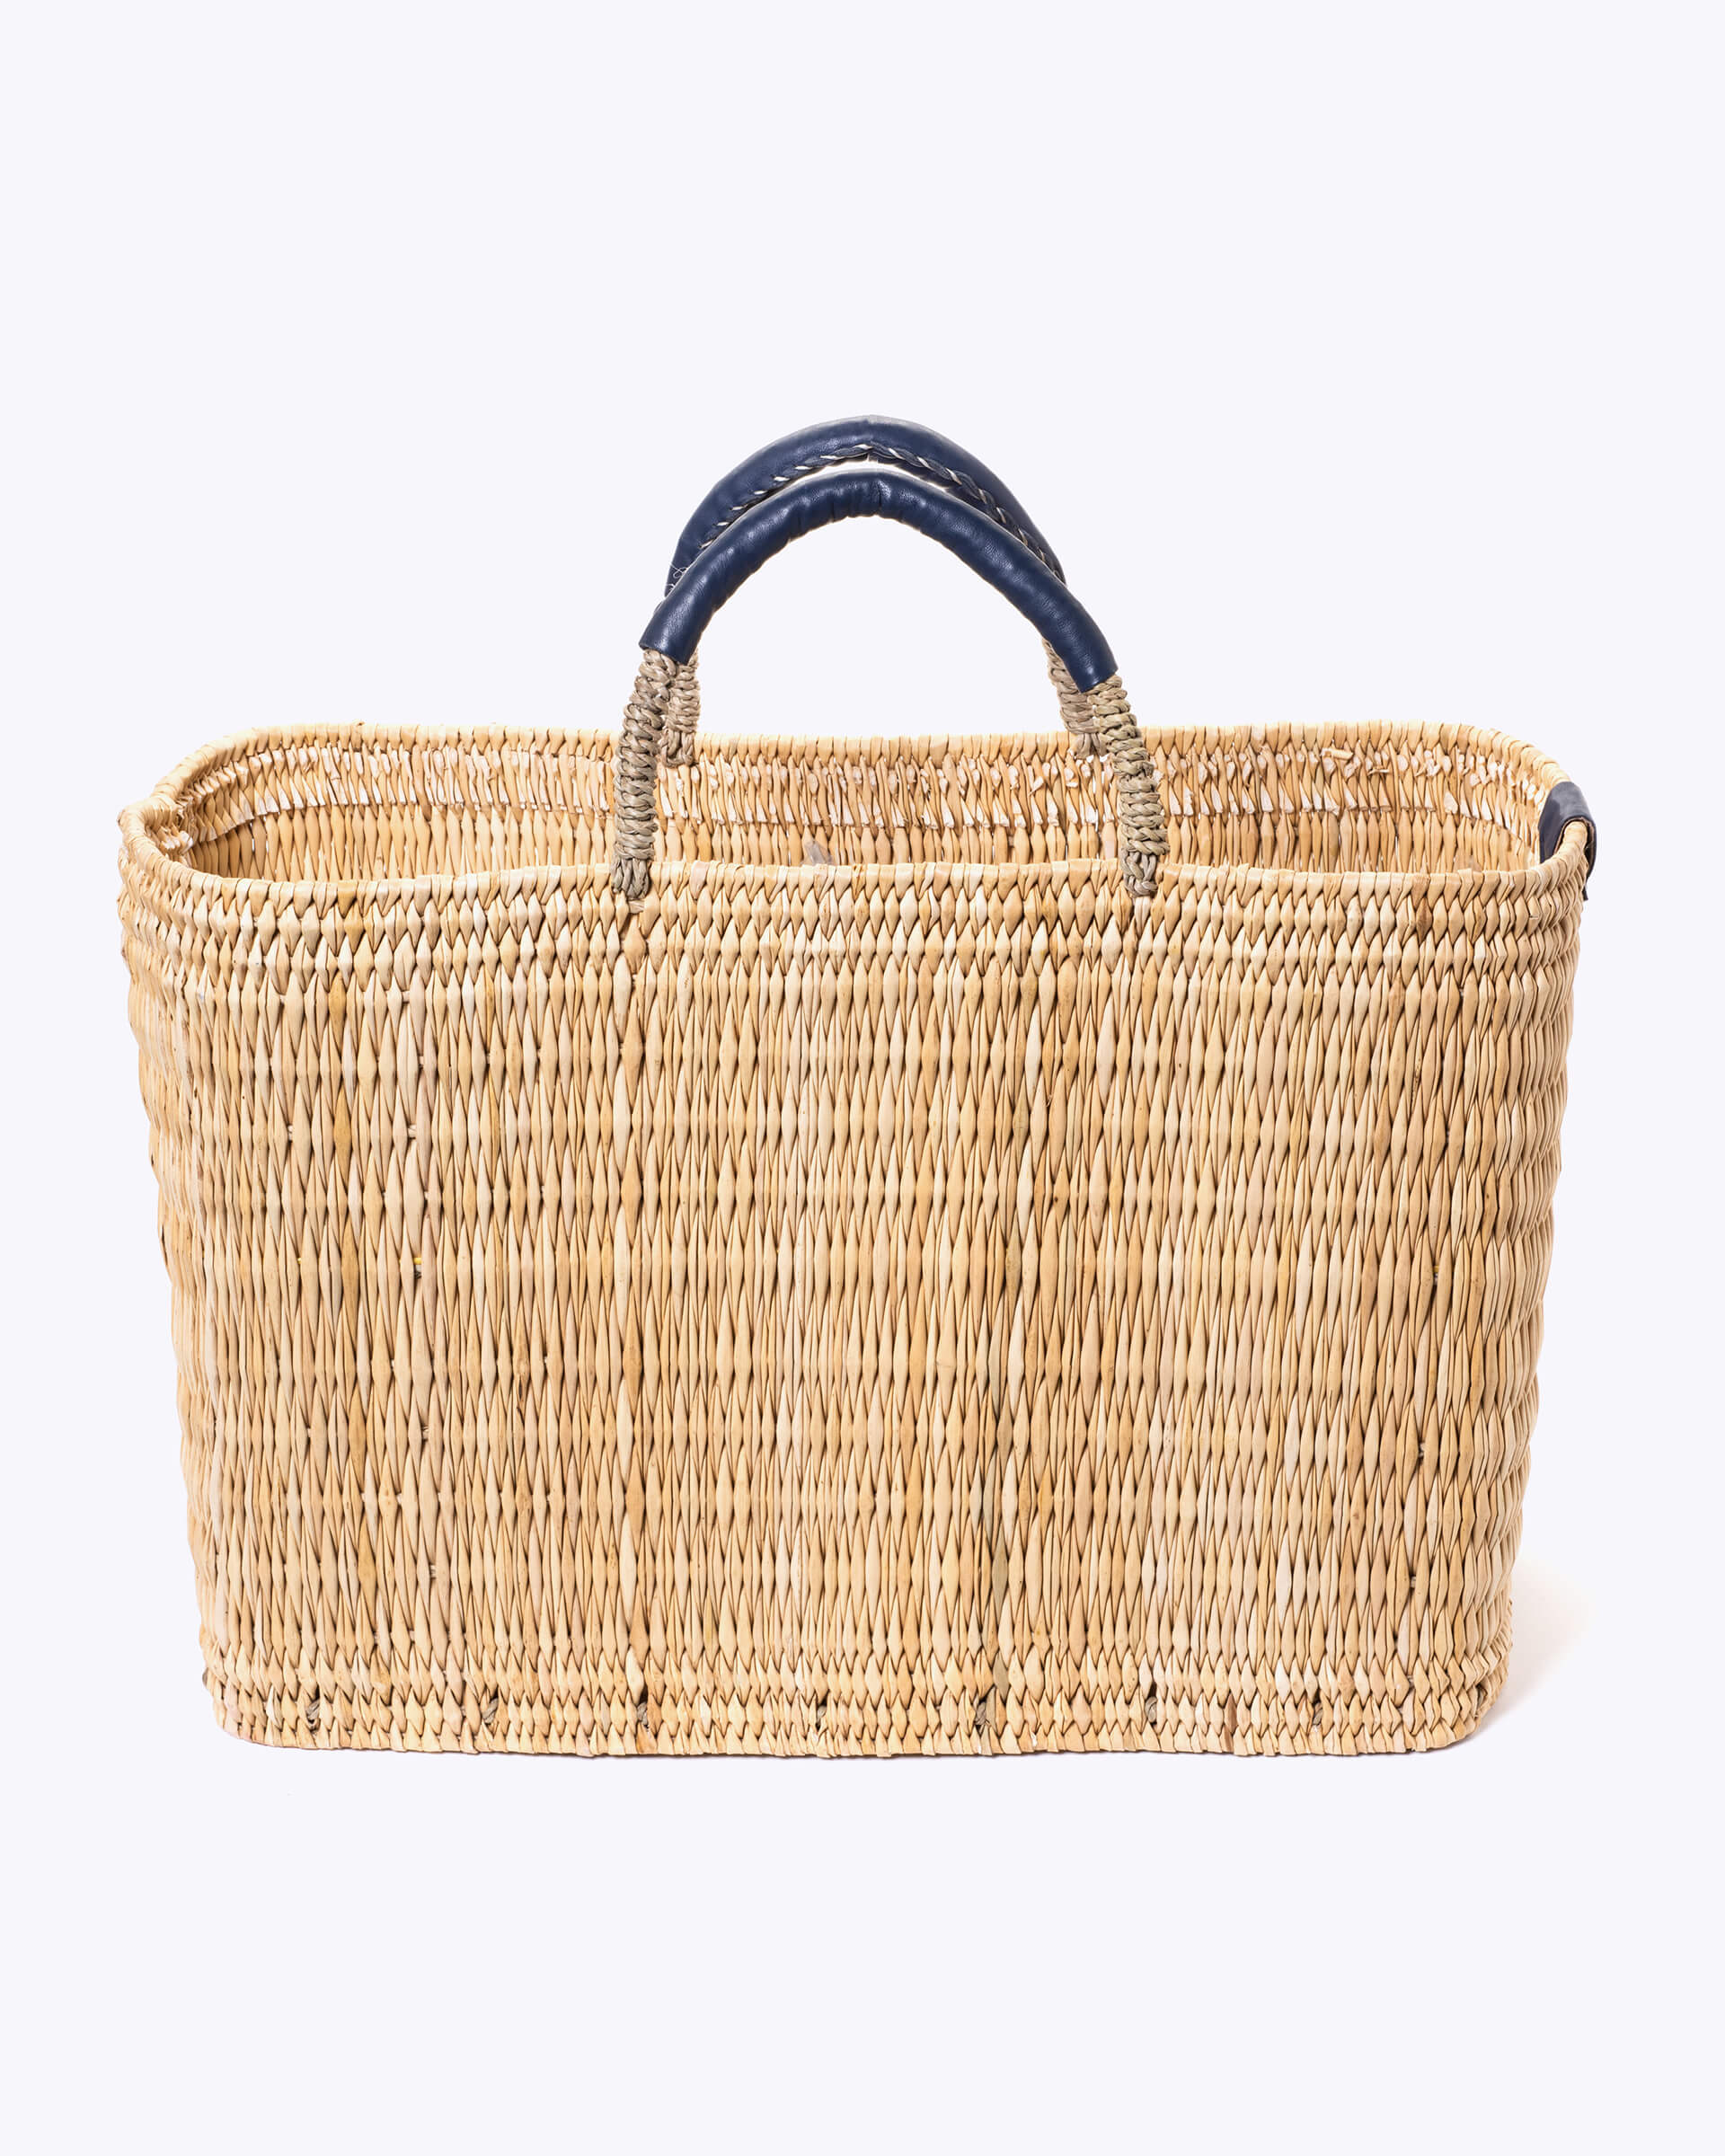 large straw basket wrapped with dark blue leather handle on a white background